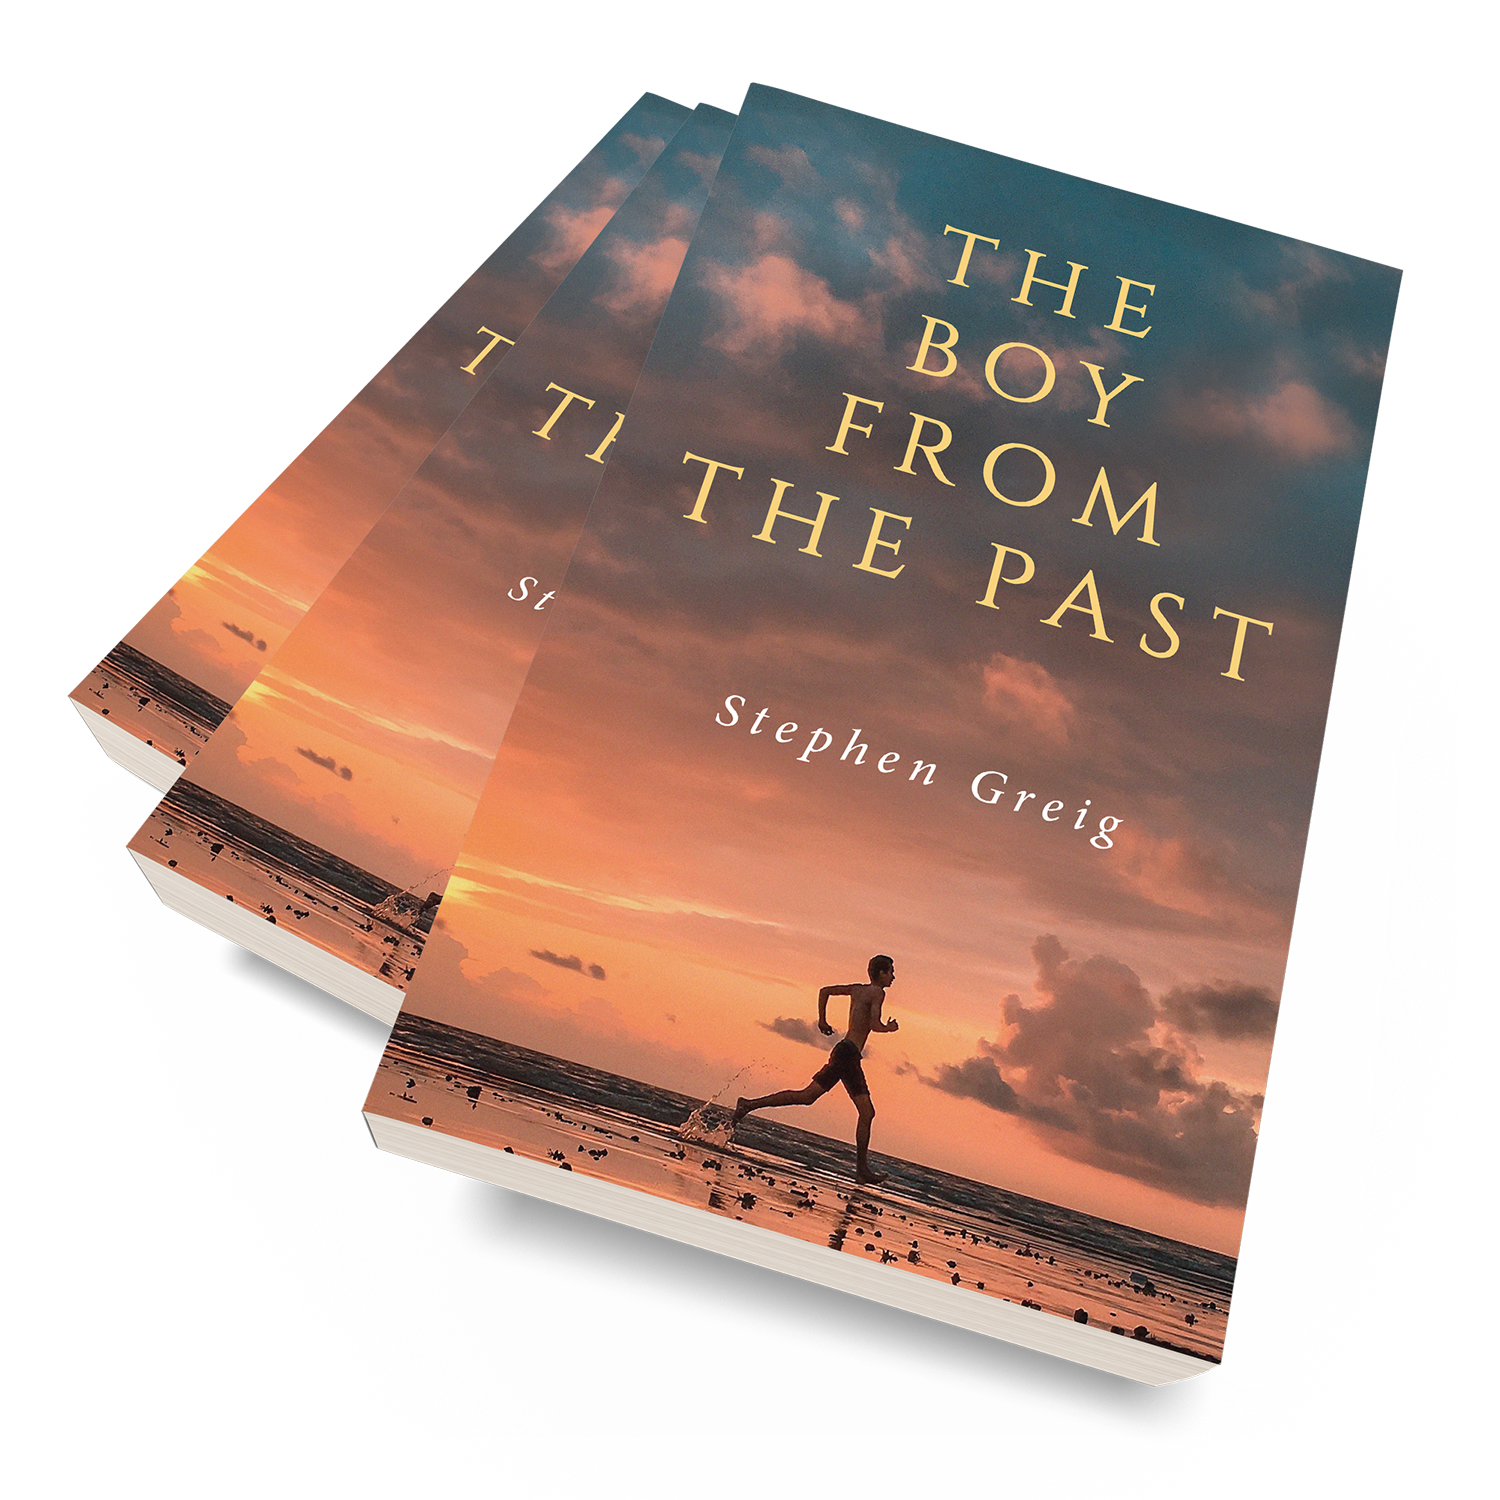 'The Boy From The Past' is an excellent time-spanning mystery, by author Stephen Grieg. The book cover and interior were designed by Mark Thomas, of coverness.com. To find out more about my book design services, please visit www.coverness.com.